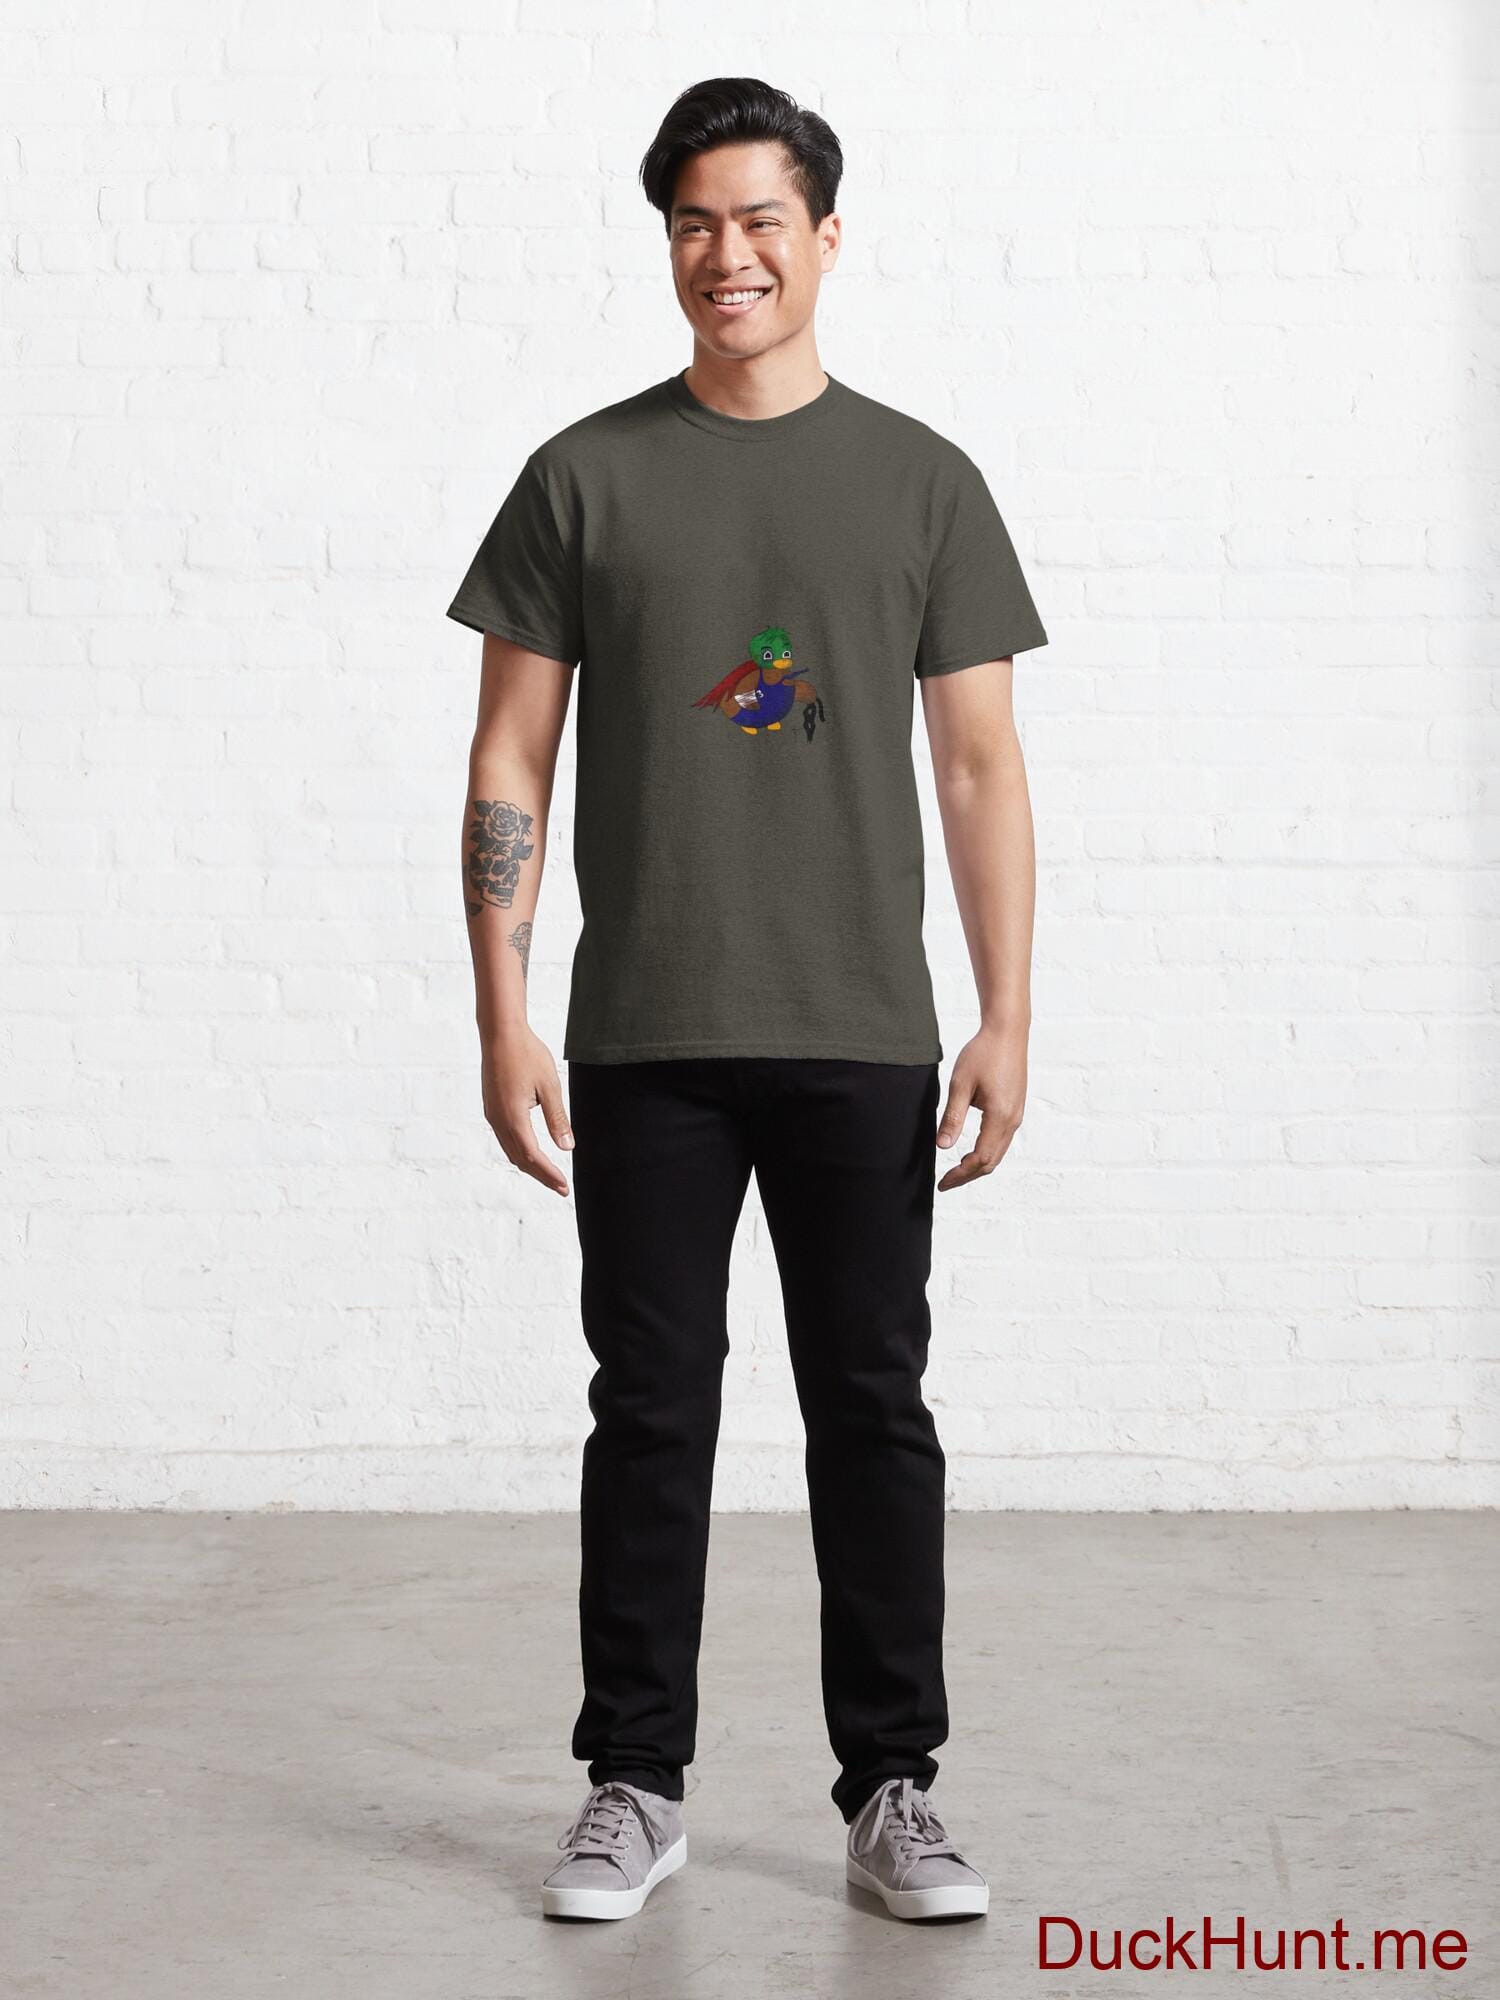 Dead DuckHunt Boss (smokeless) Army Classic T-Shirt (Front printed) alternative image 6